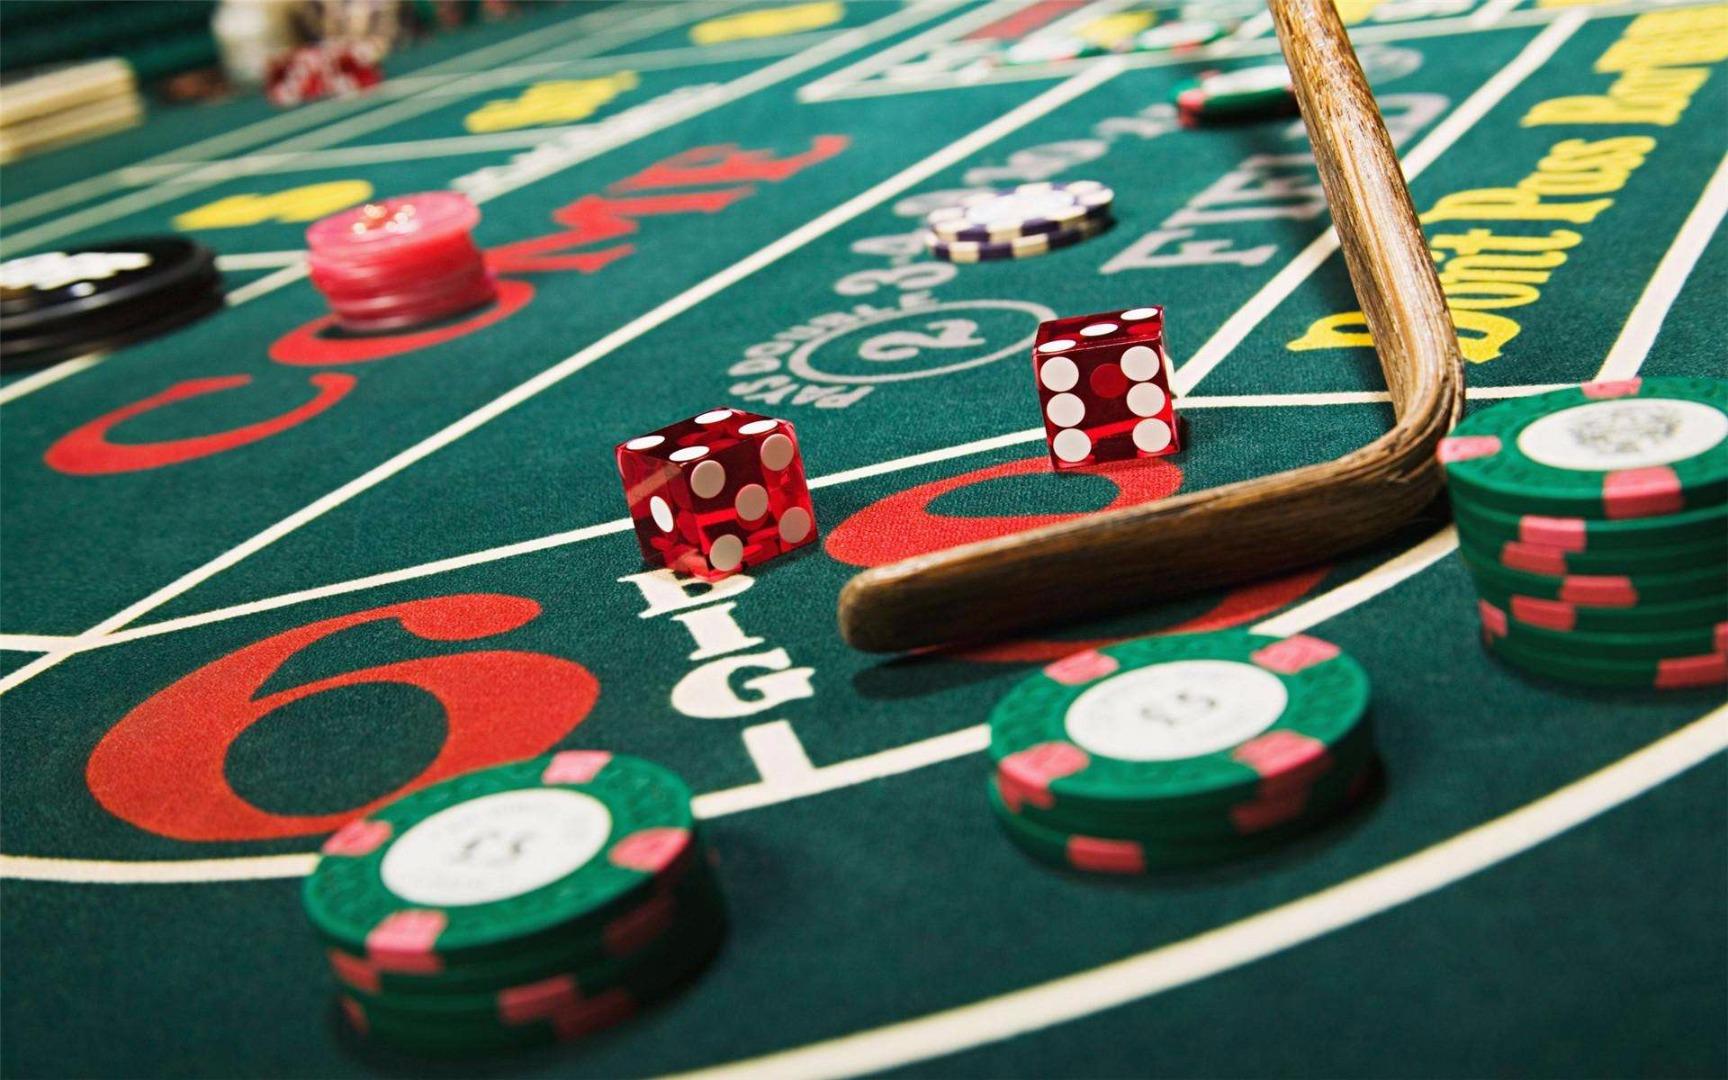 Top 7 Effective Tips for Playing Poker at Casino - They Really Help!